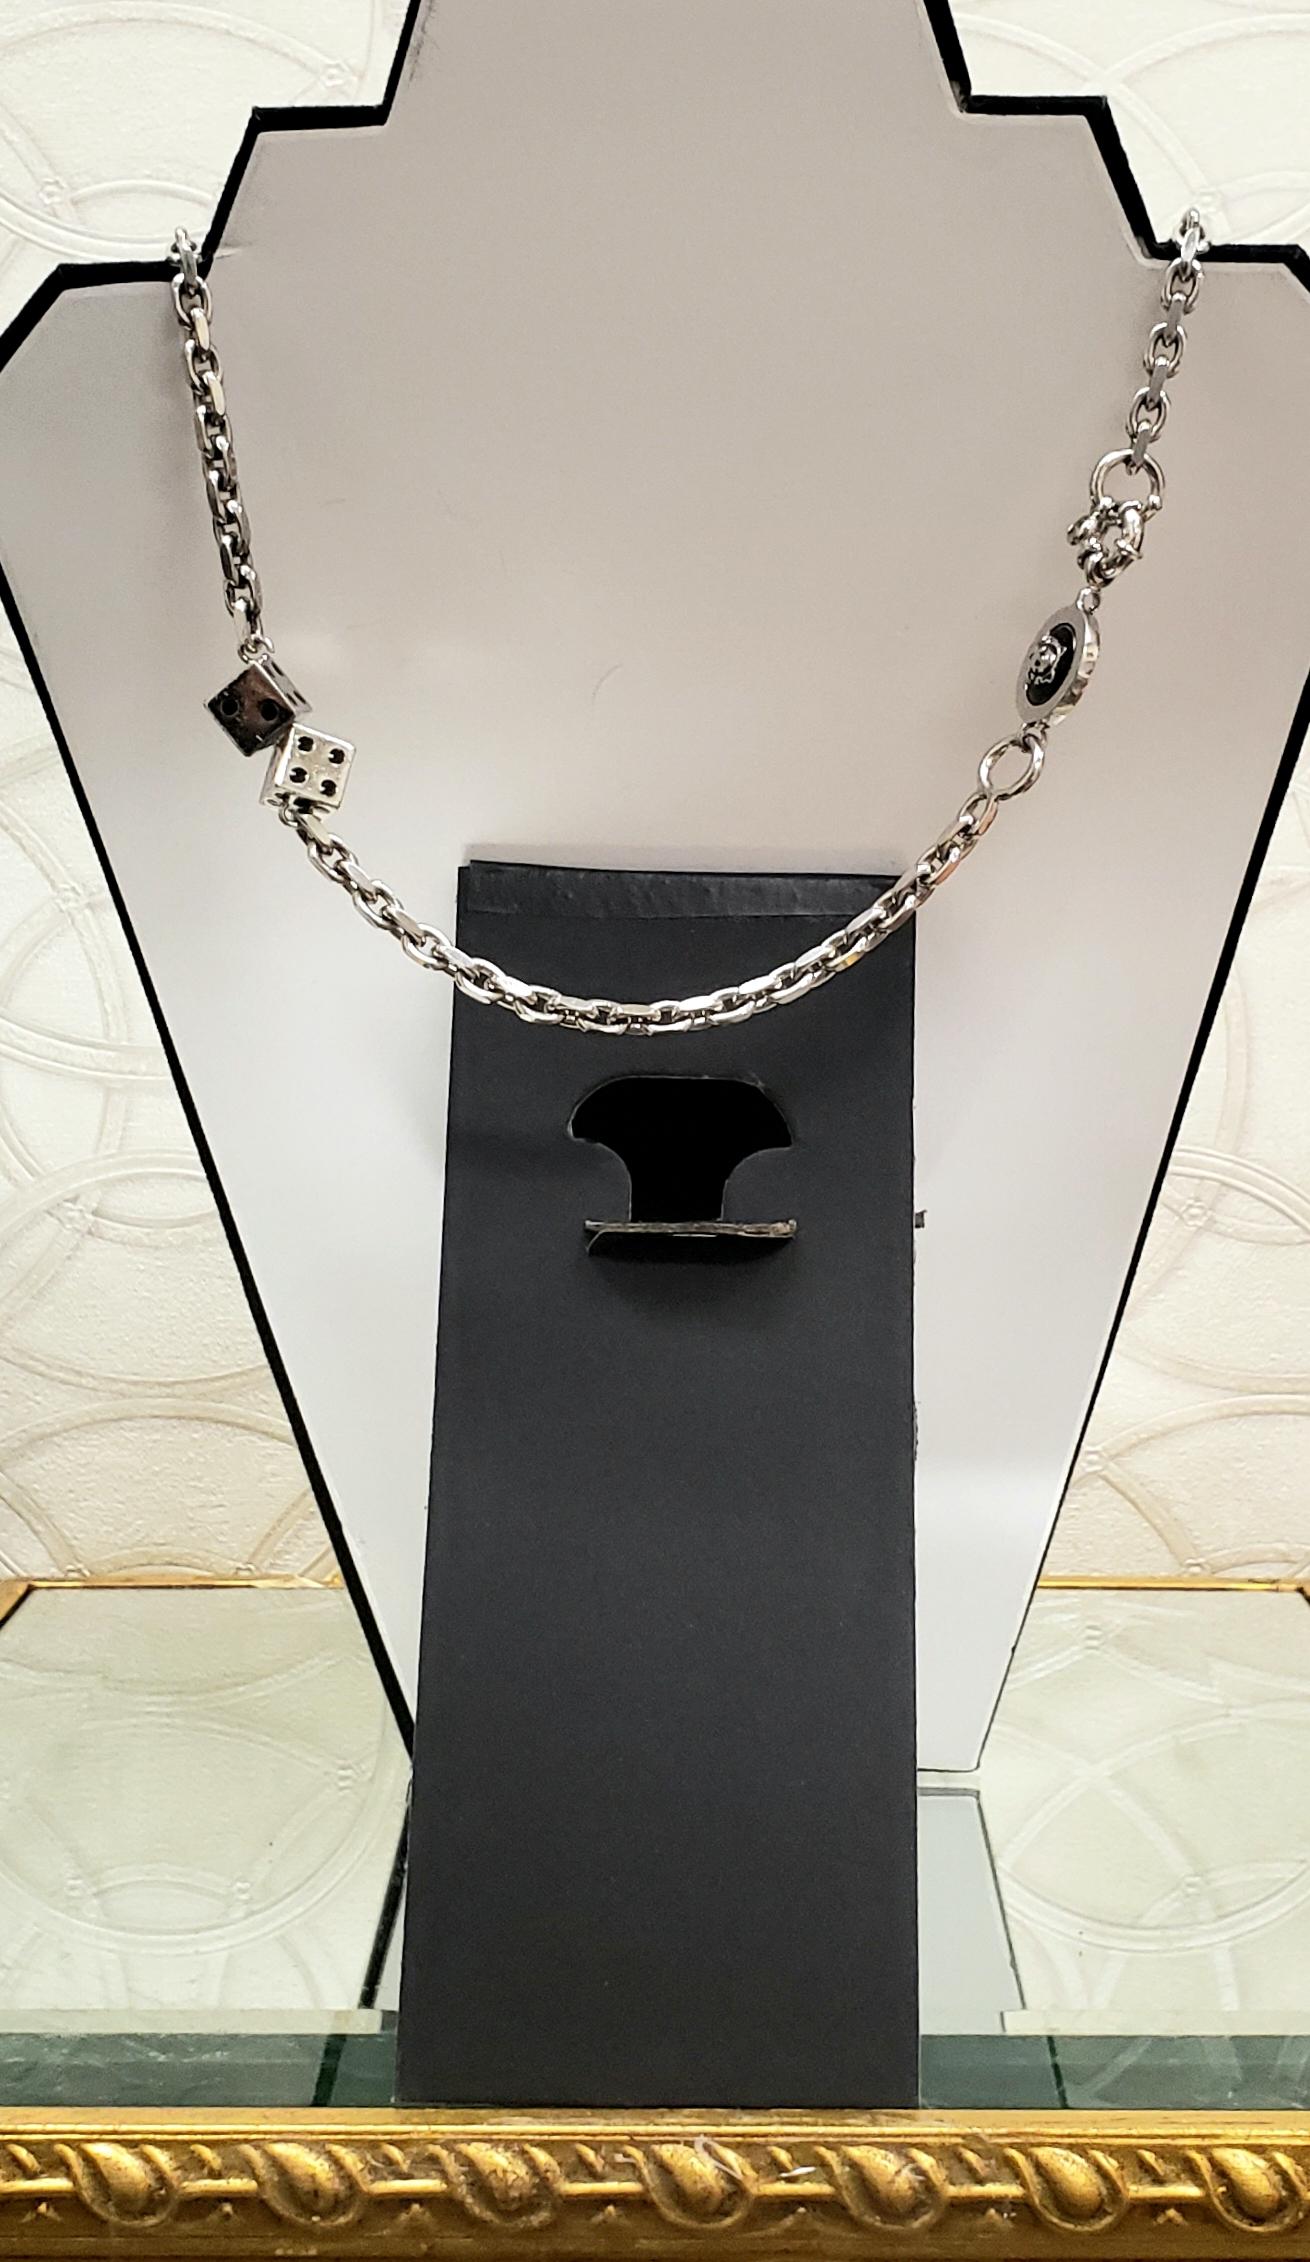   VERSACE
Actual PR-Sample Spring 2011 

     Silver tone Medusa Necklace

Made in Italy



Necklace length 14